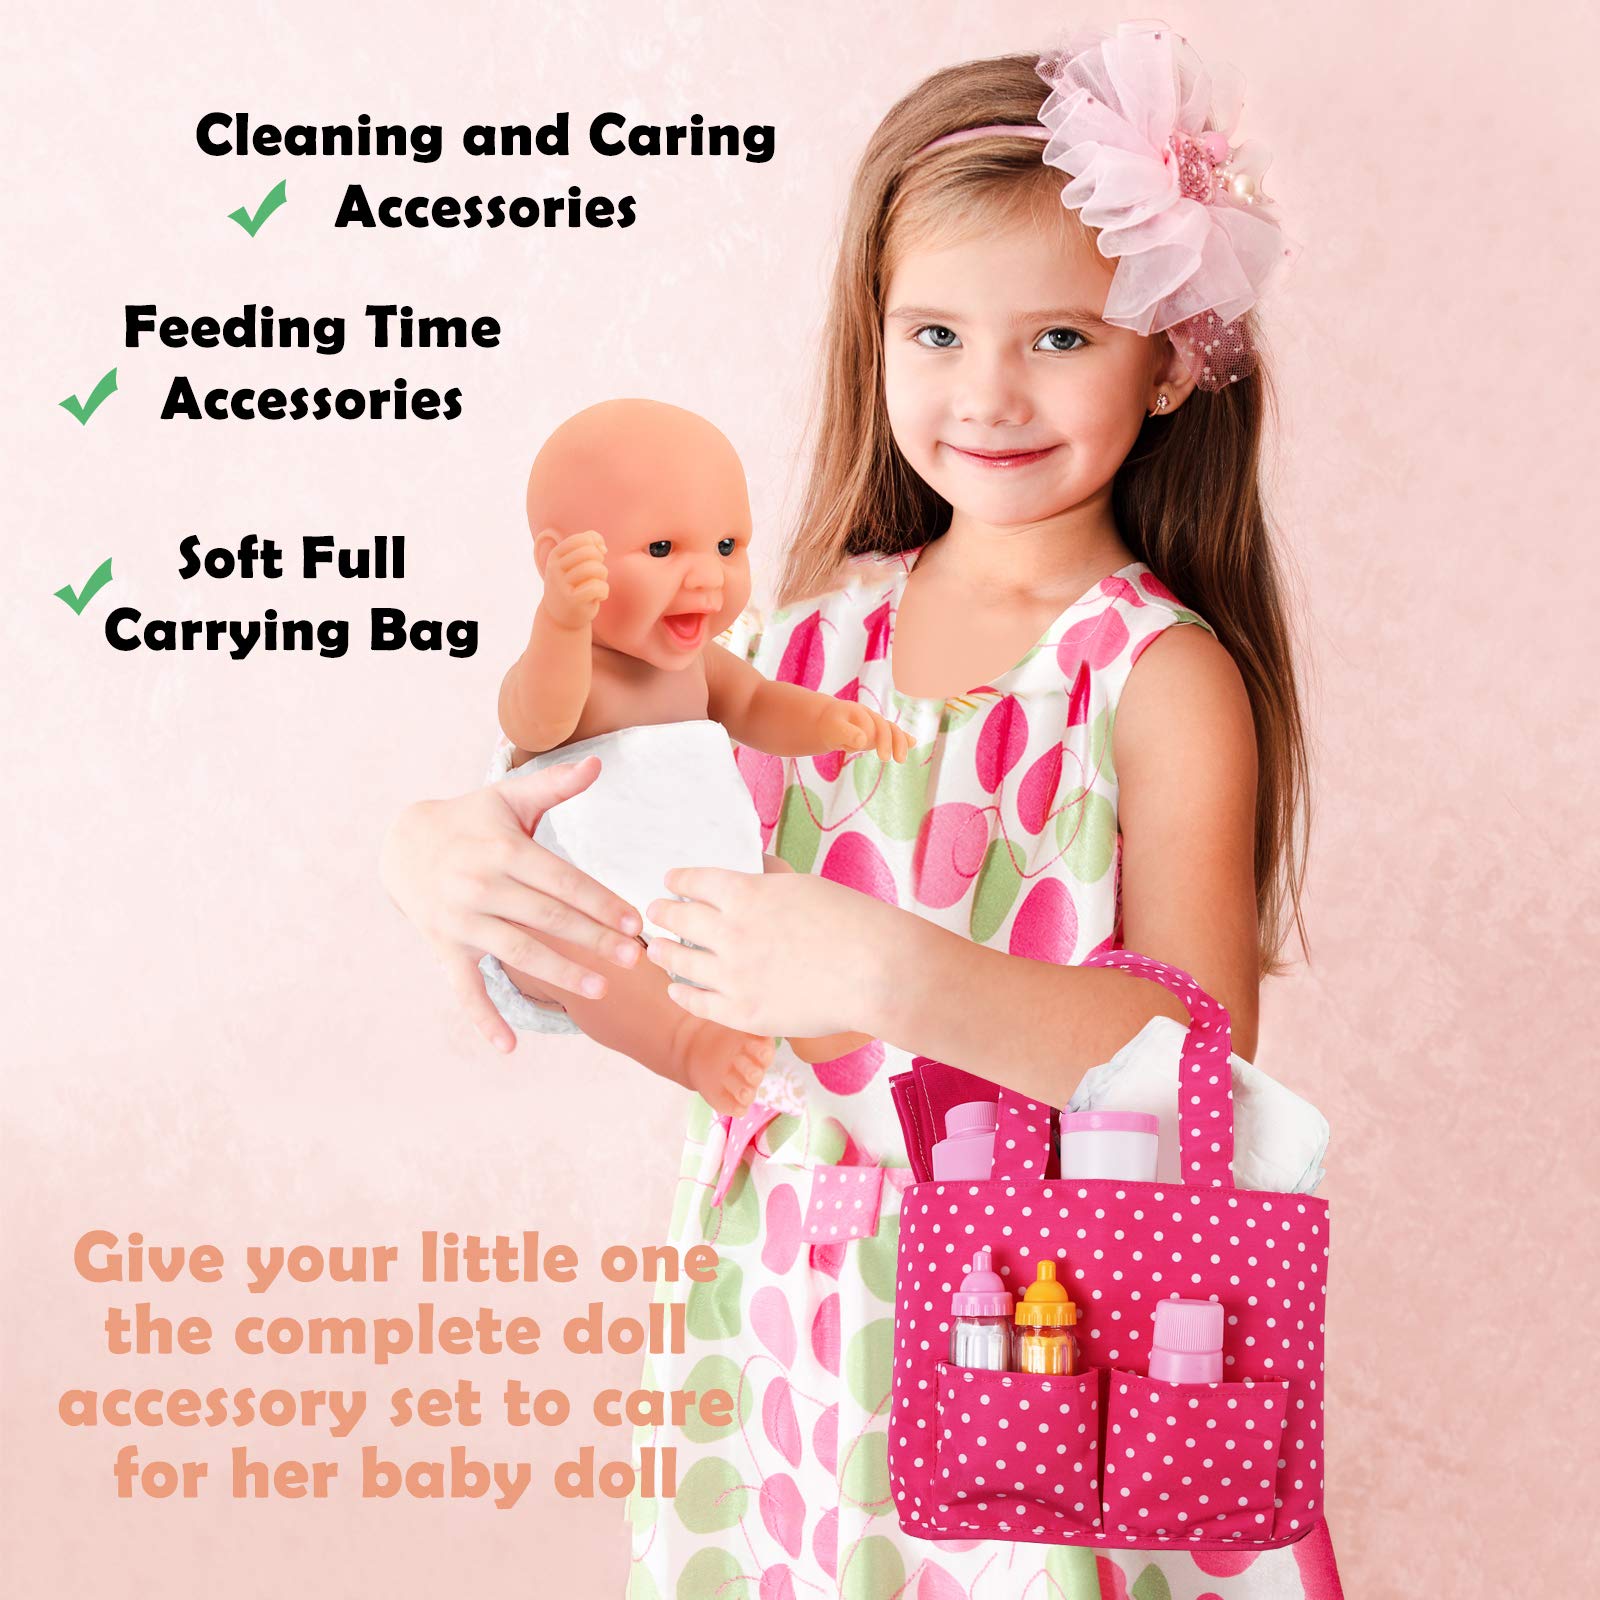 Click N' Play Baby Girl Doll Diaper Bag, Pink Soft Carrying Bag Including Cleaning, Caring, & Feeding Accessories - Bag, Baby Doll Diapers, Baby Doll Bottles for Feeding, Towel, Powder, Lotion, Wipes